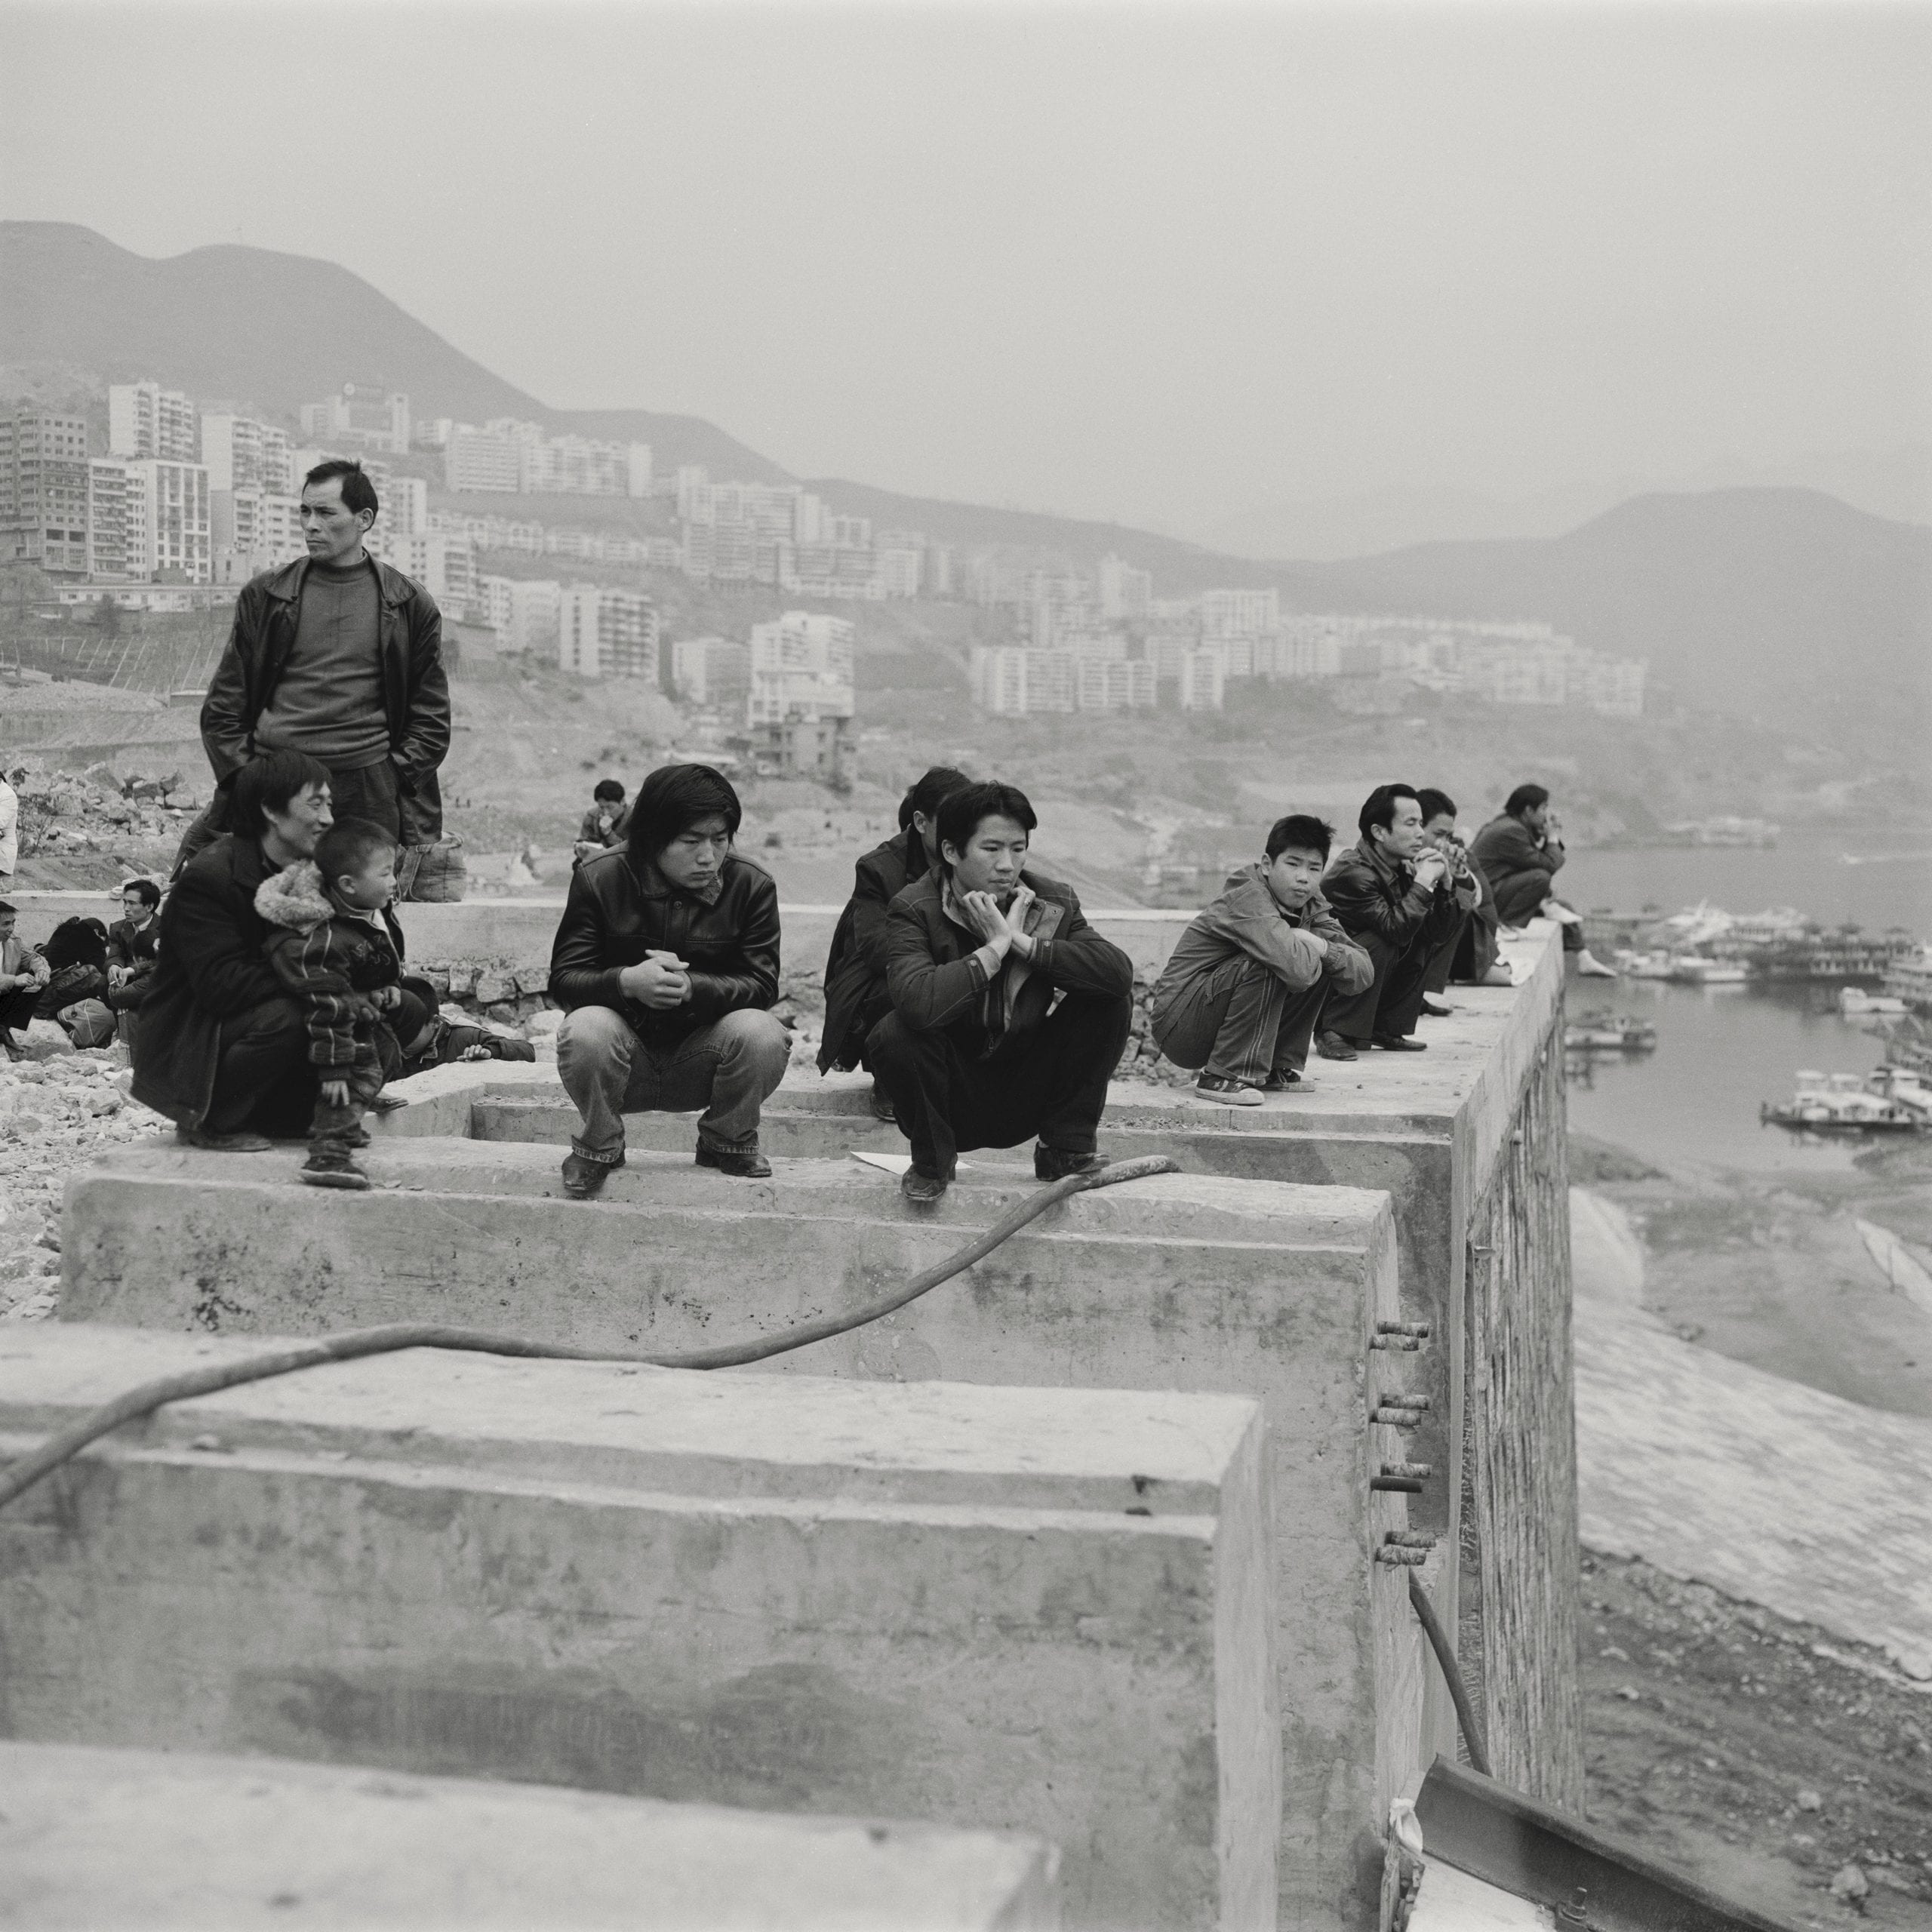 Muge travels the Yangtze River, tenderly photographing communities displaced by flooding | 1854 Photography